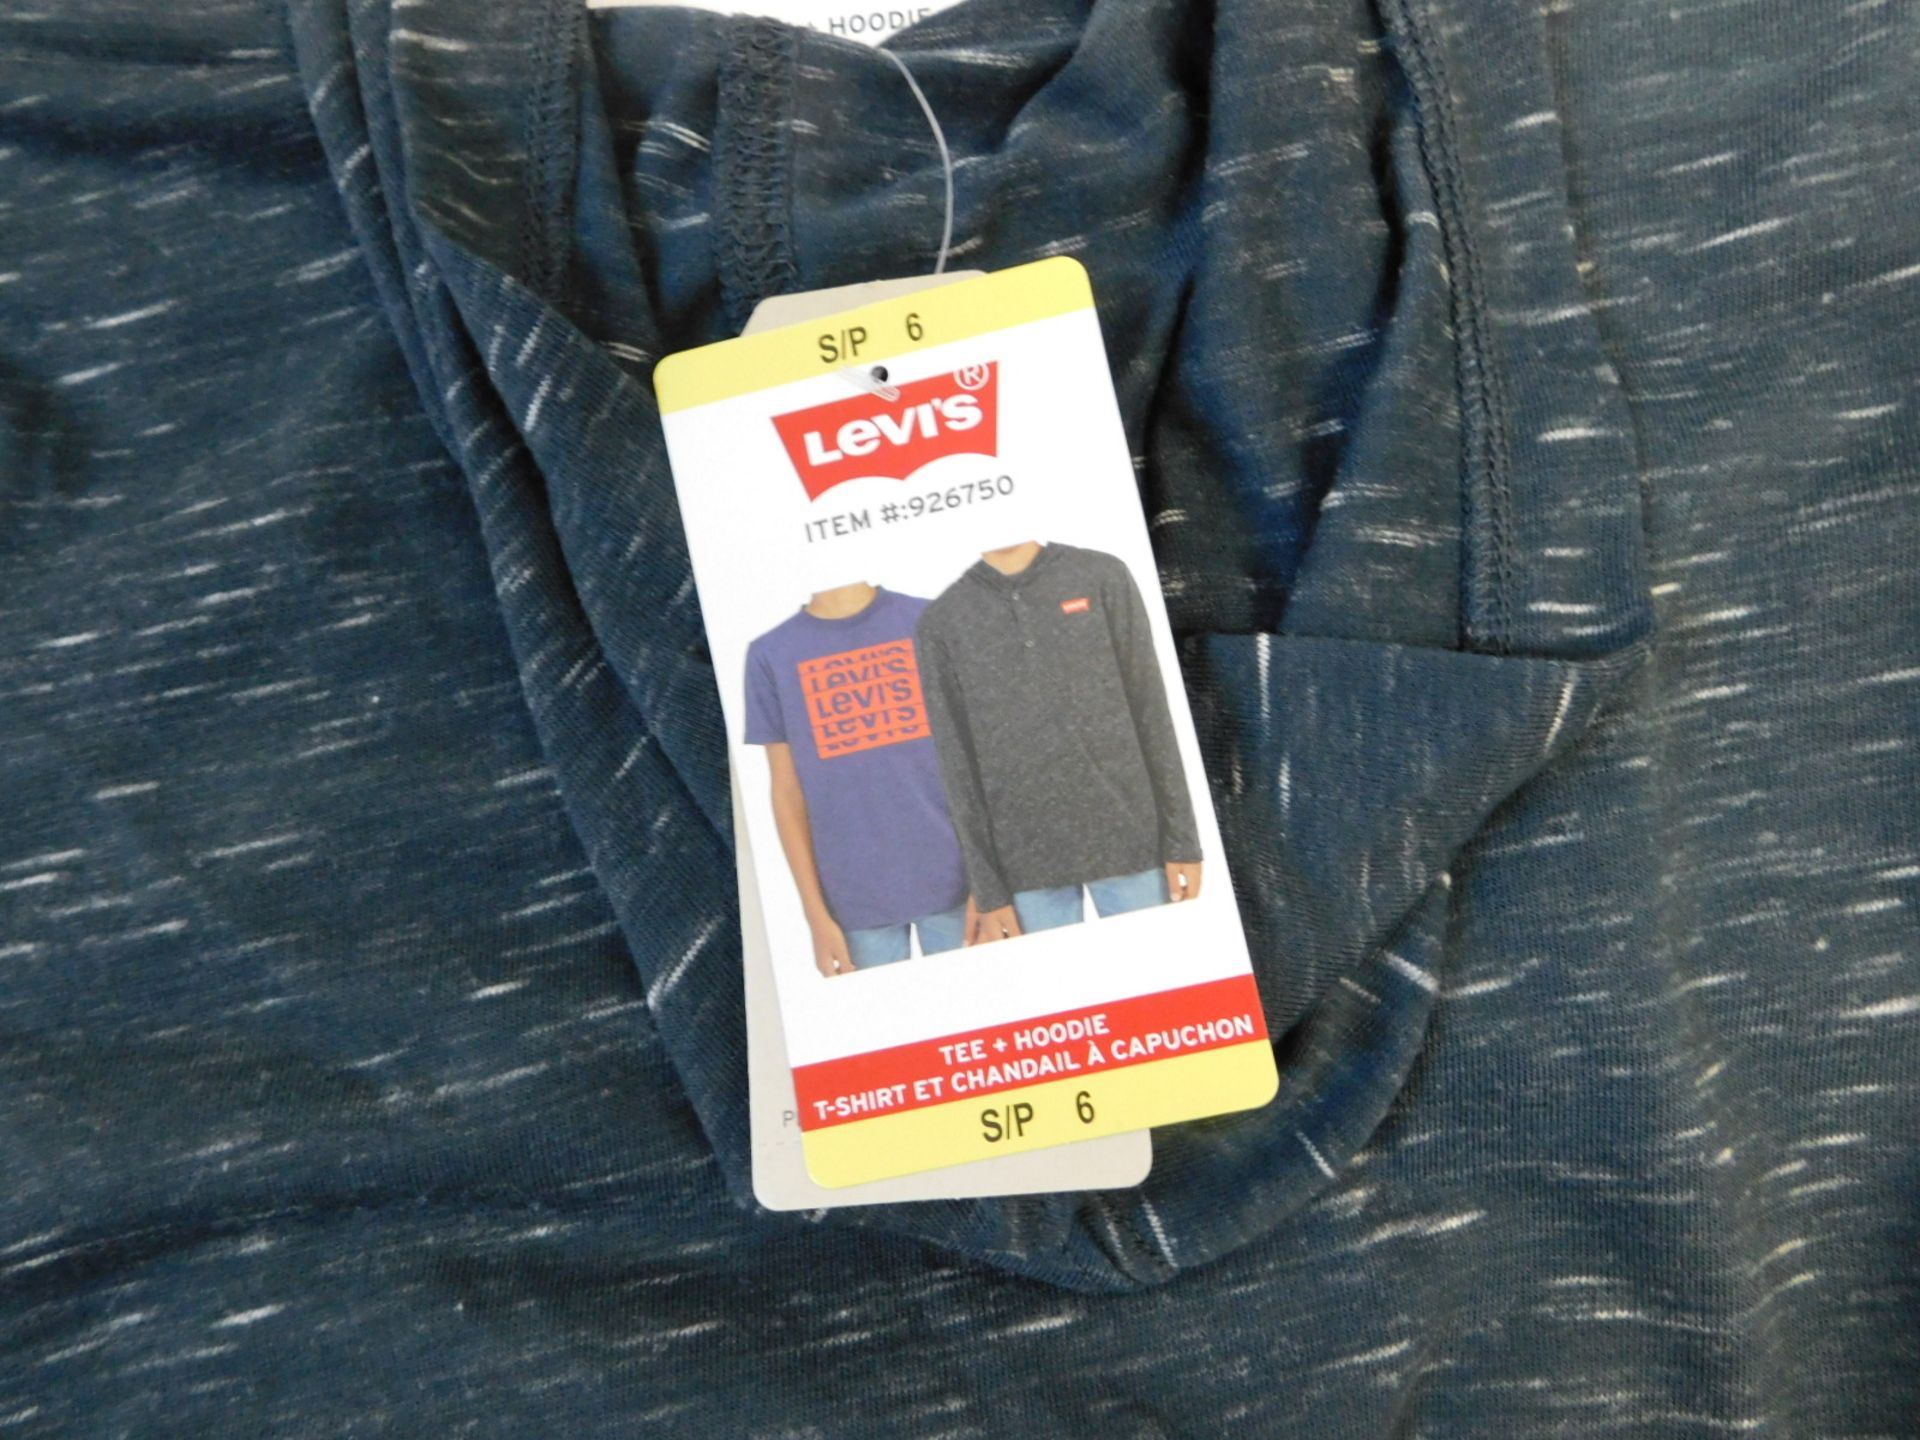 1 BRAND NEW LEVI'S YOUTH HOODIE AND TEE SET 1 X LONG SLEEVE, 1 SHORT SLEEVE SIZE S/P 6 RRP Â£19